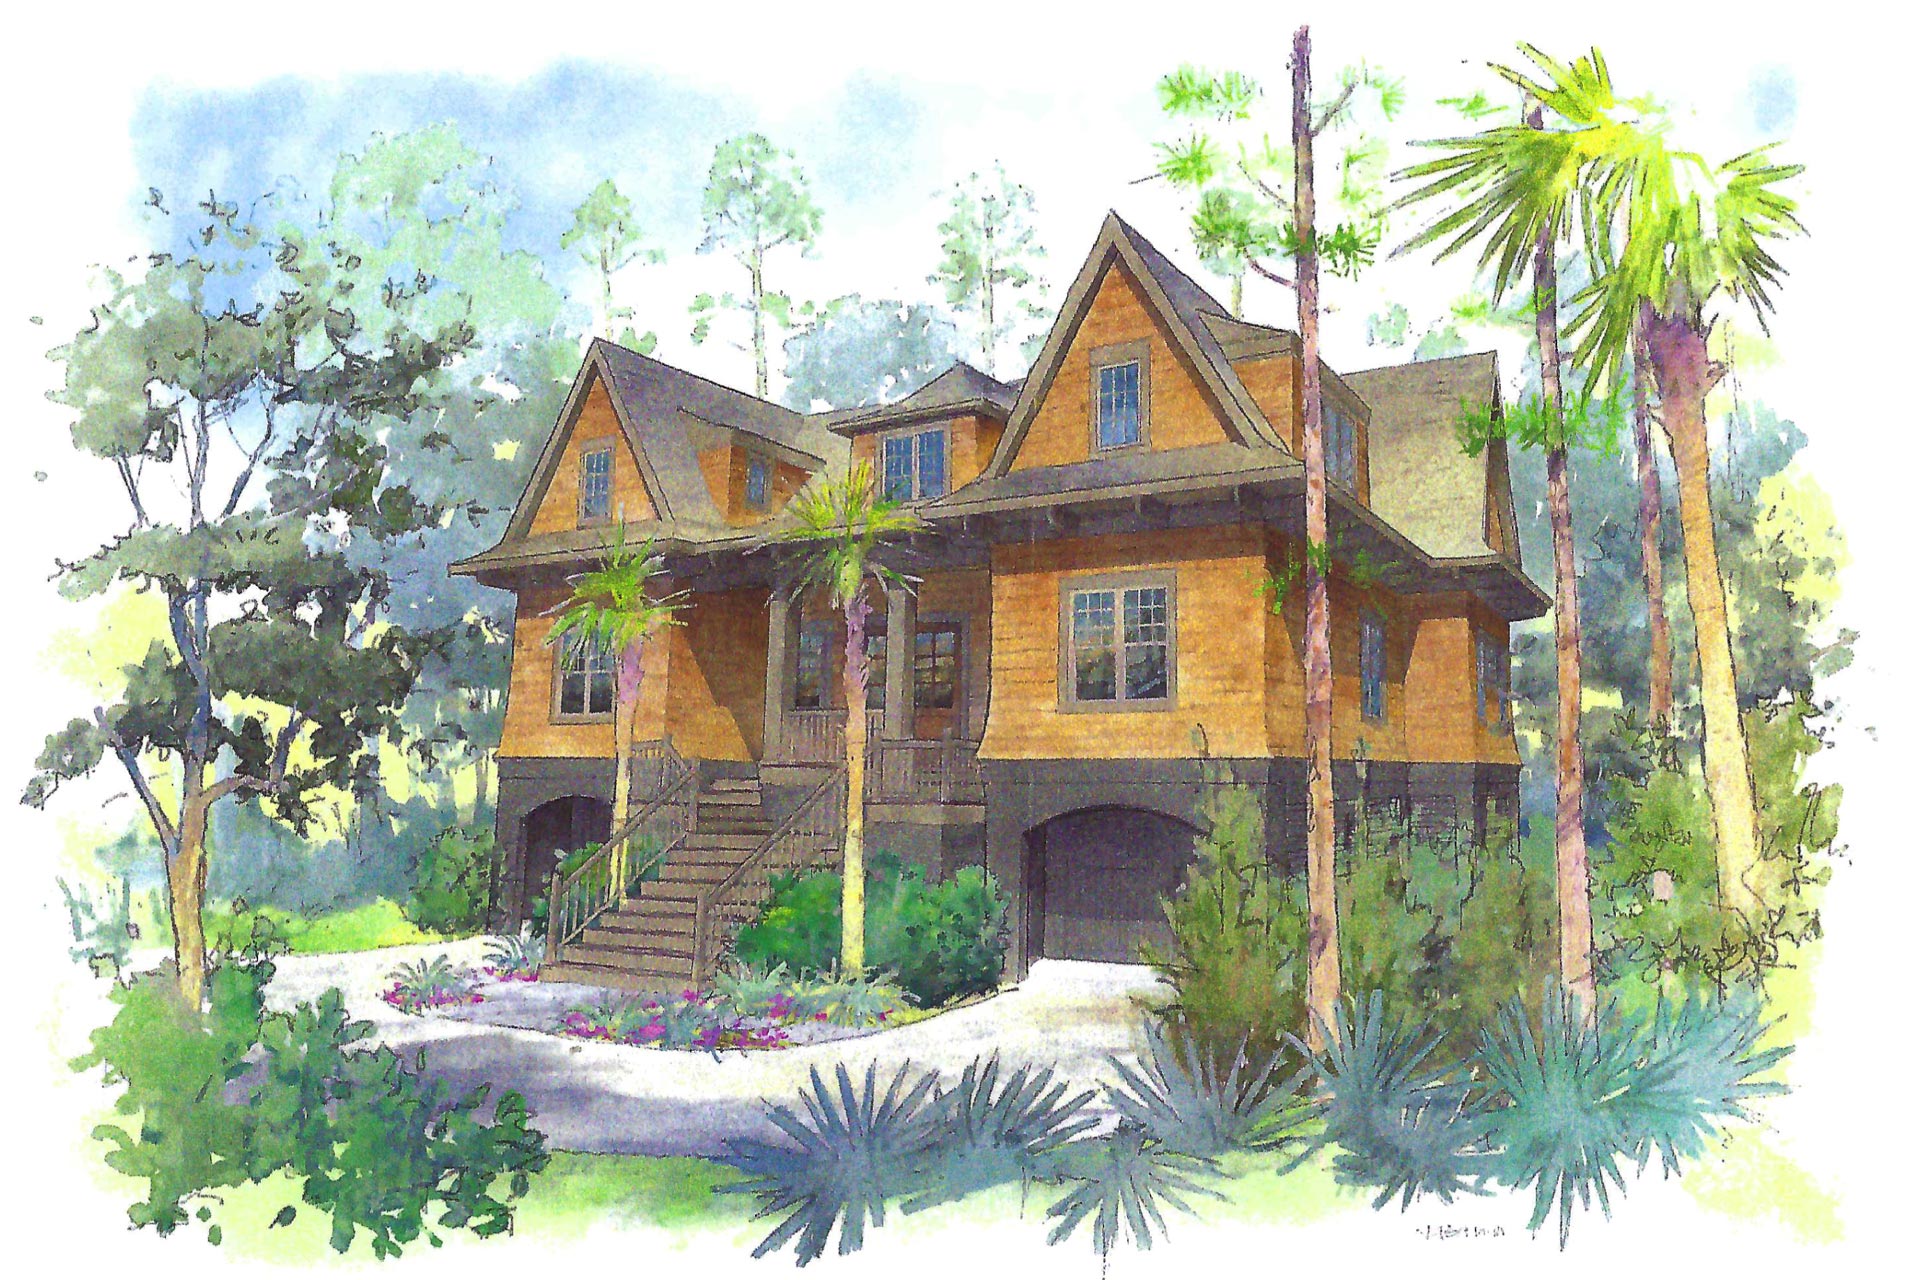 Water color rending of new home designed by Swallowtail Architecture on Kiawah Island of cedar shake siding modern Victorian elegance